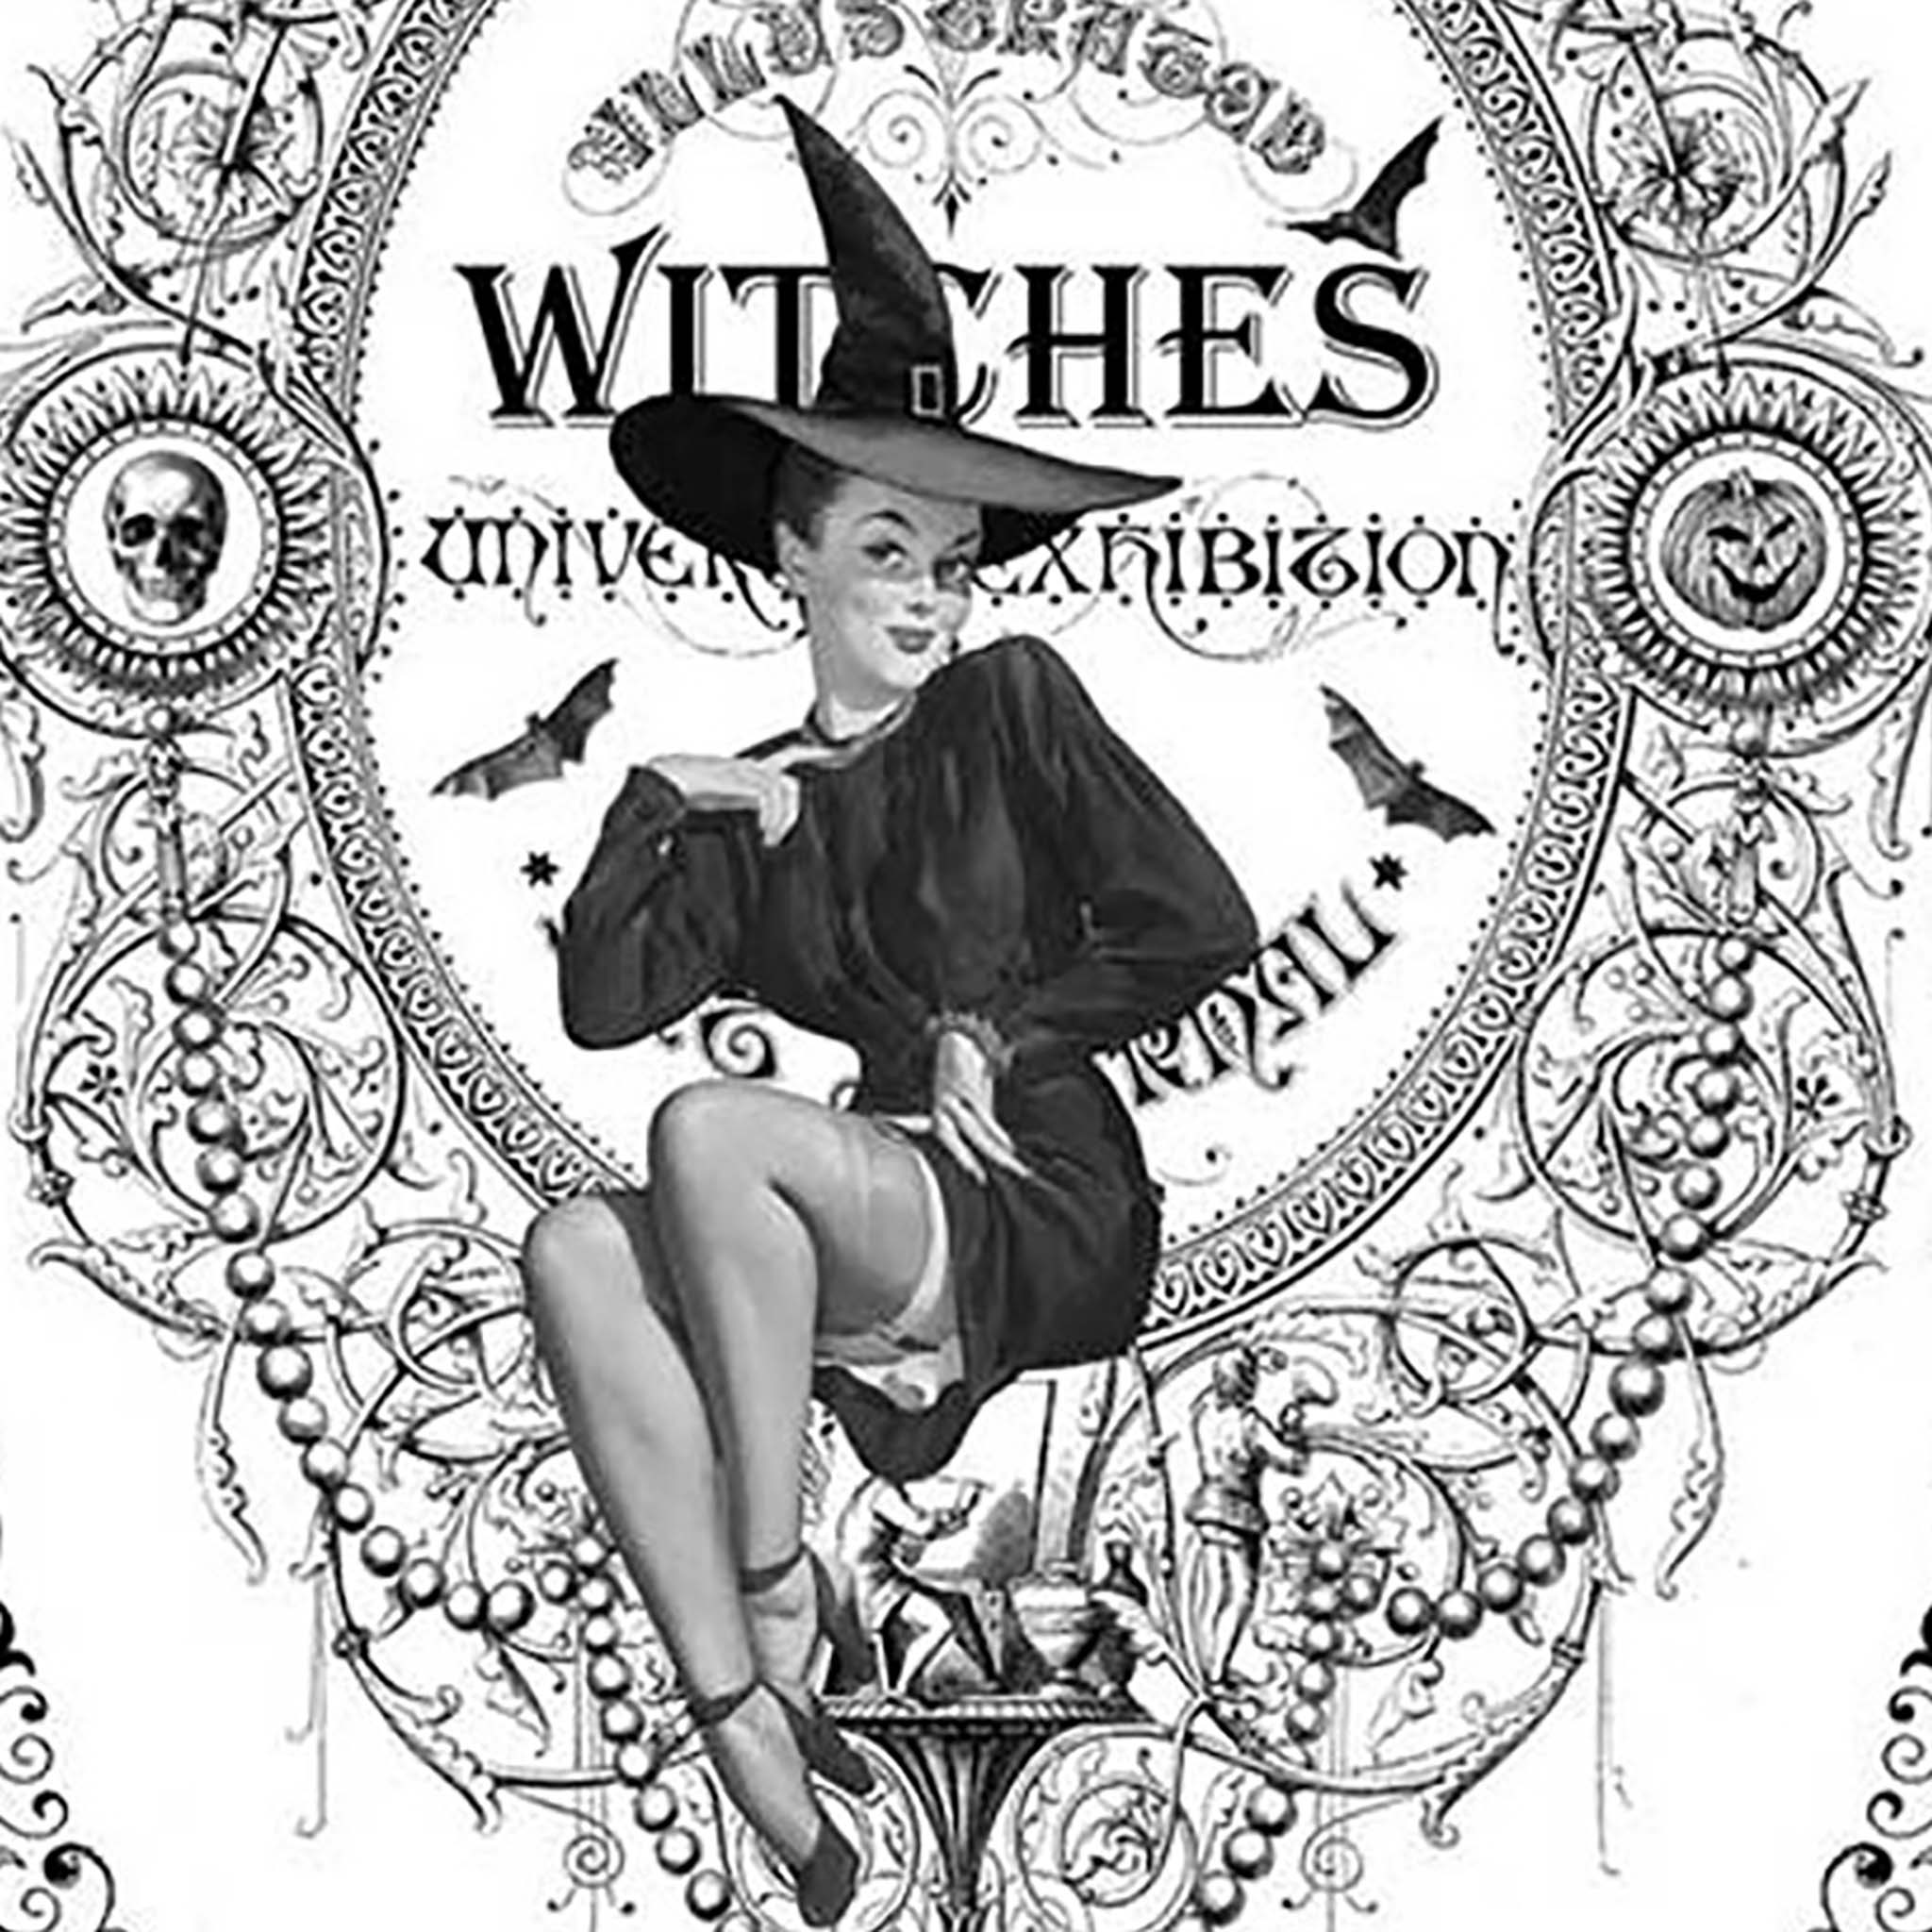 Close-up of an A4 rice paper design that features ornate corners with bats and spiders and a vintage style pinup witch sitting in a spooky ornate frame with the word "witches" behind her.